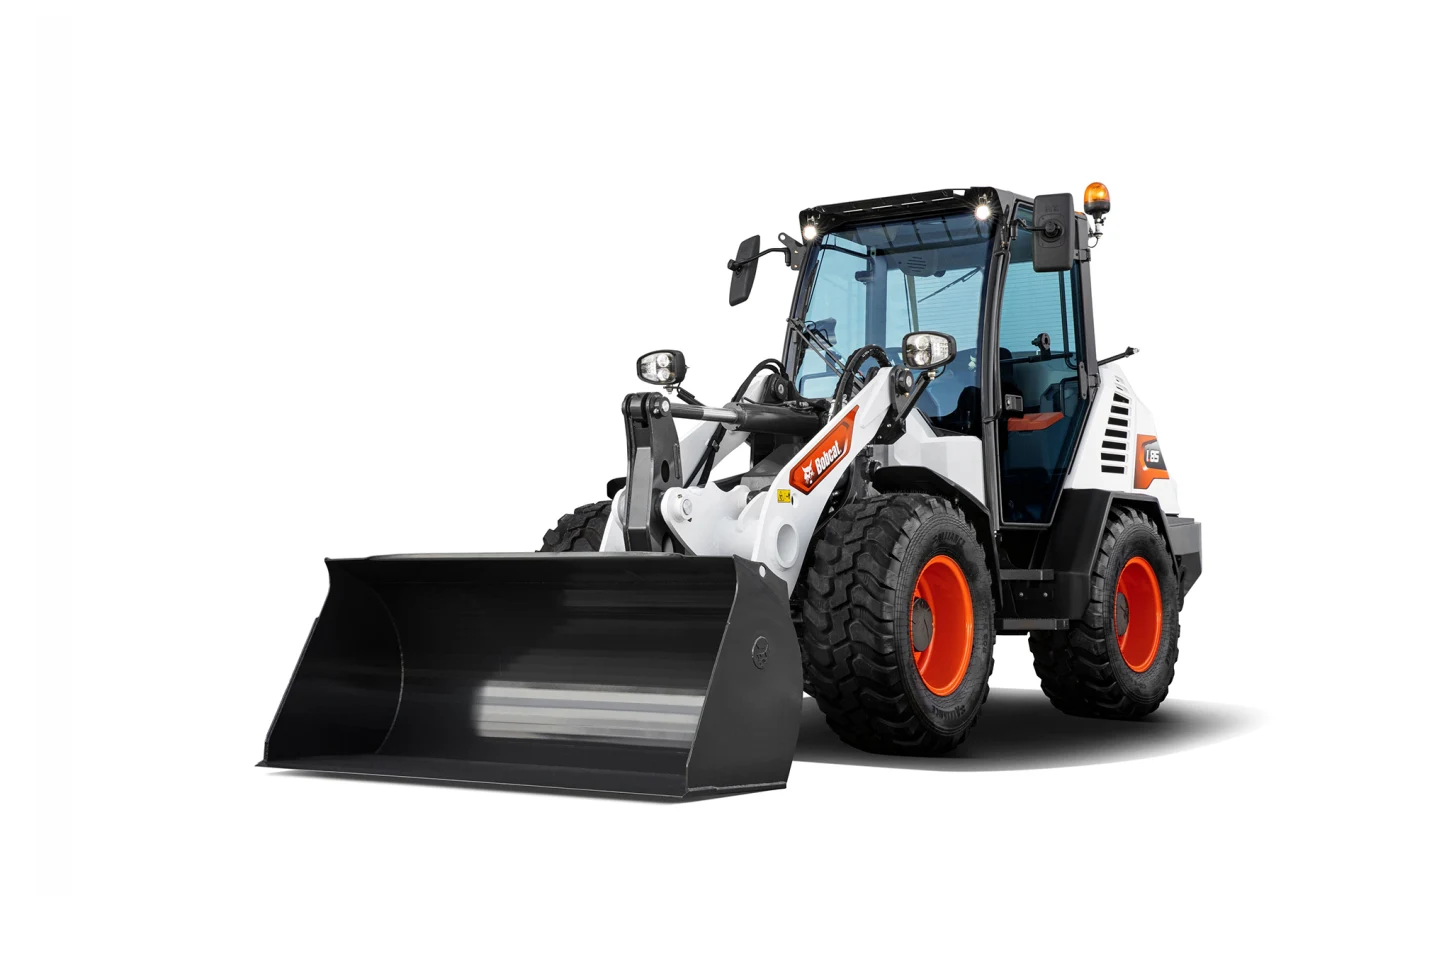 Browse Specs and more for the Bobcat L85 Compact Wheel Loader - KC Bobcat